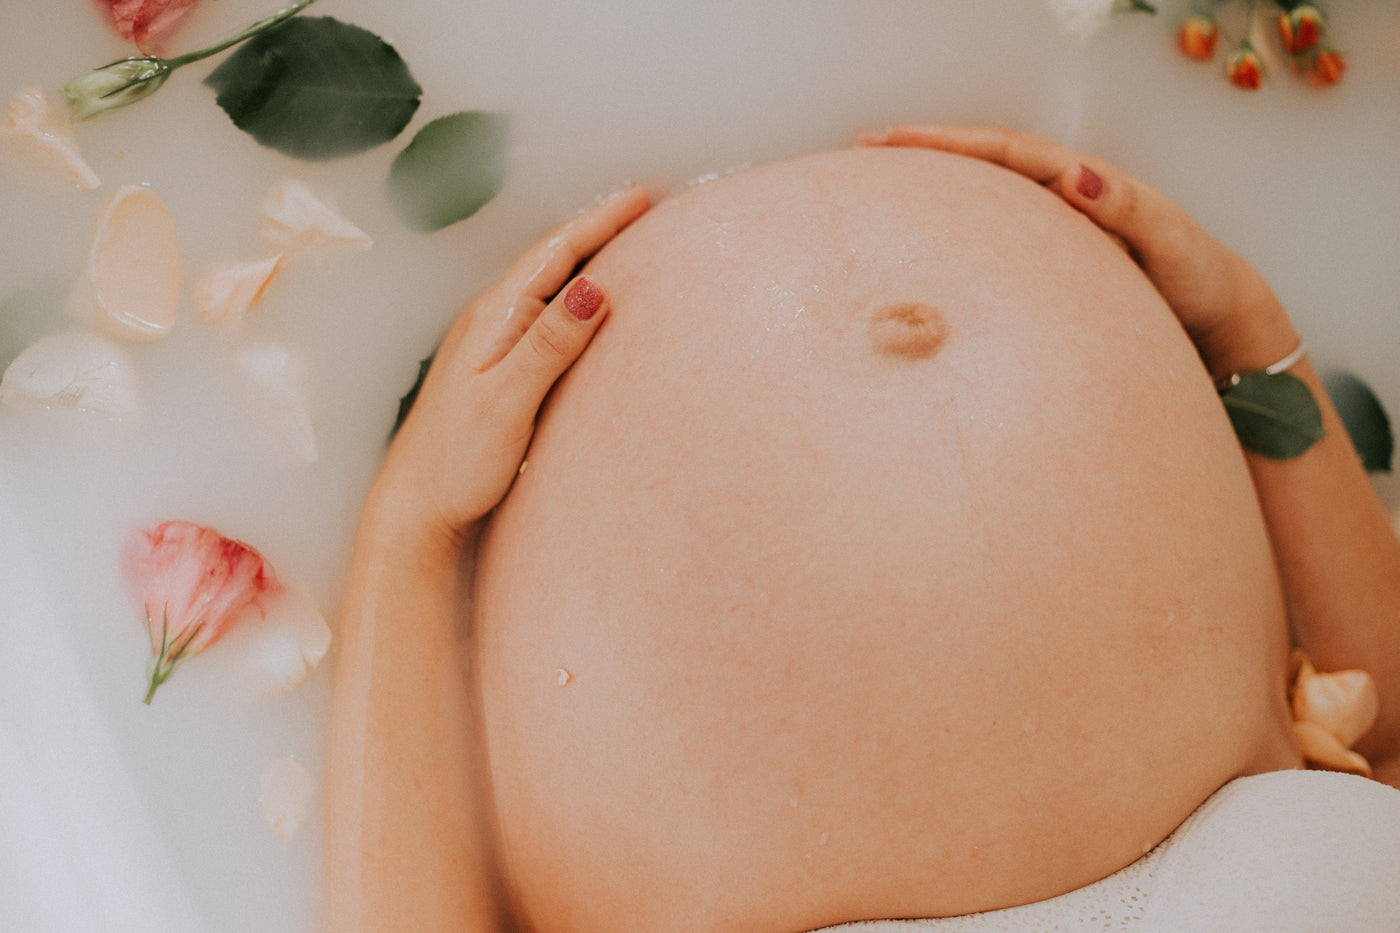 Fluid retention during pregnancy: here's what you need to know!